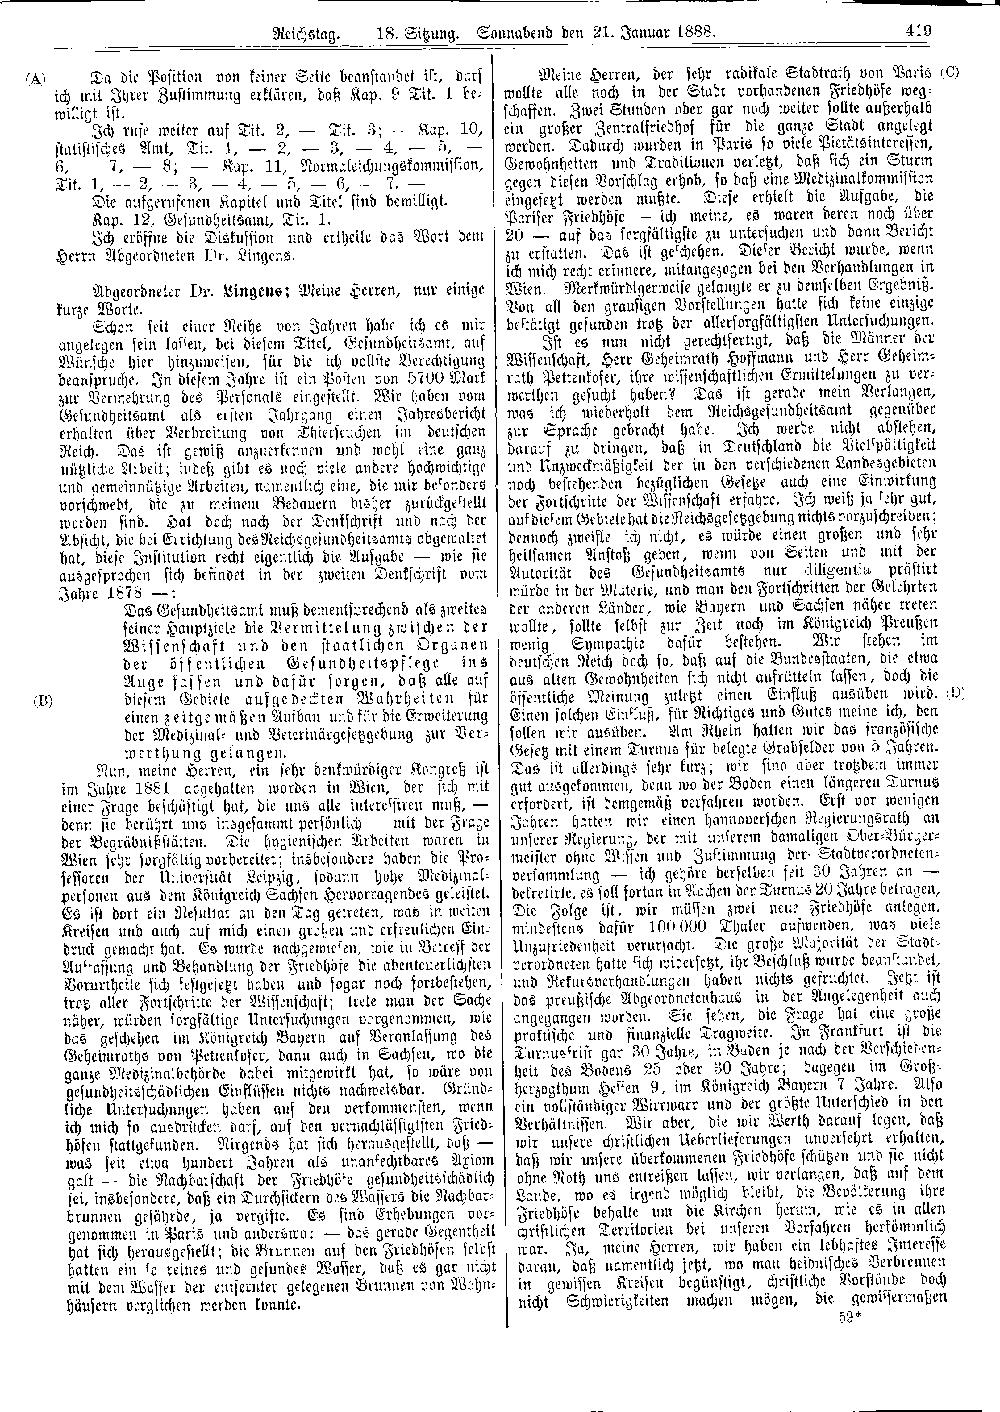 Scan of page 419